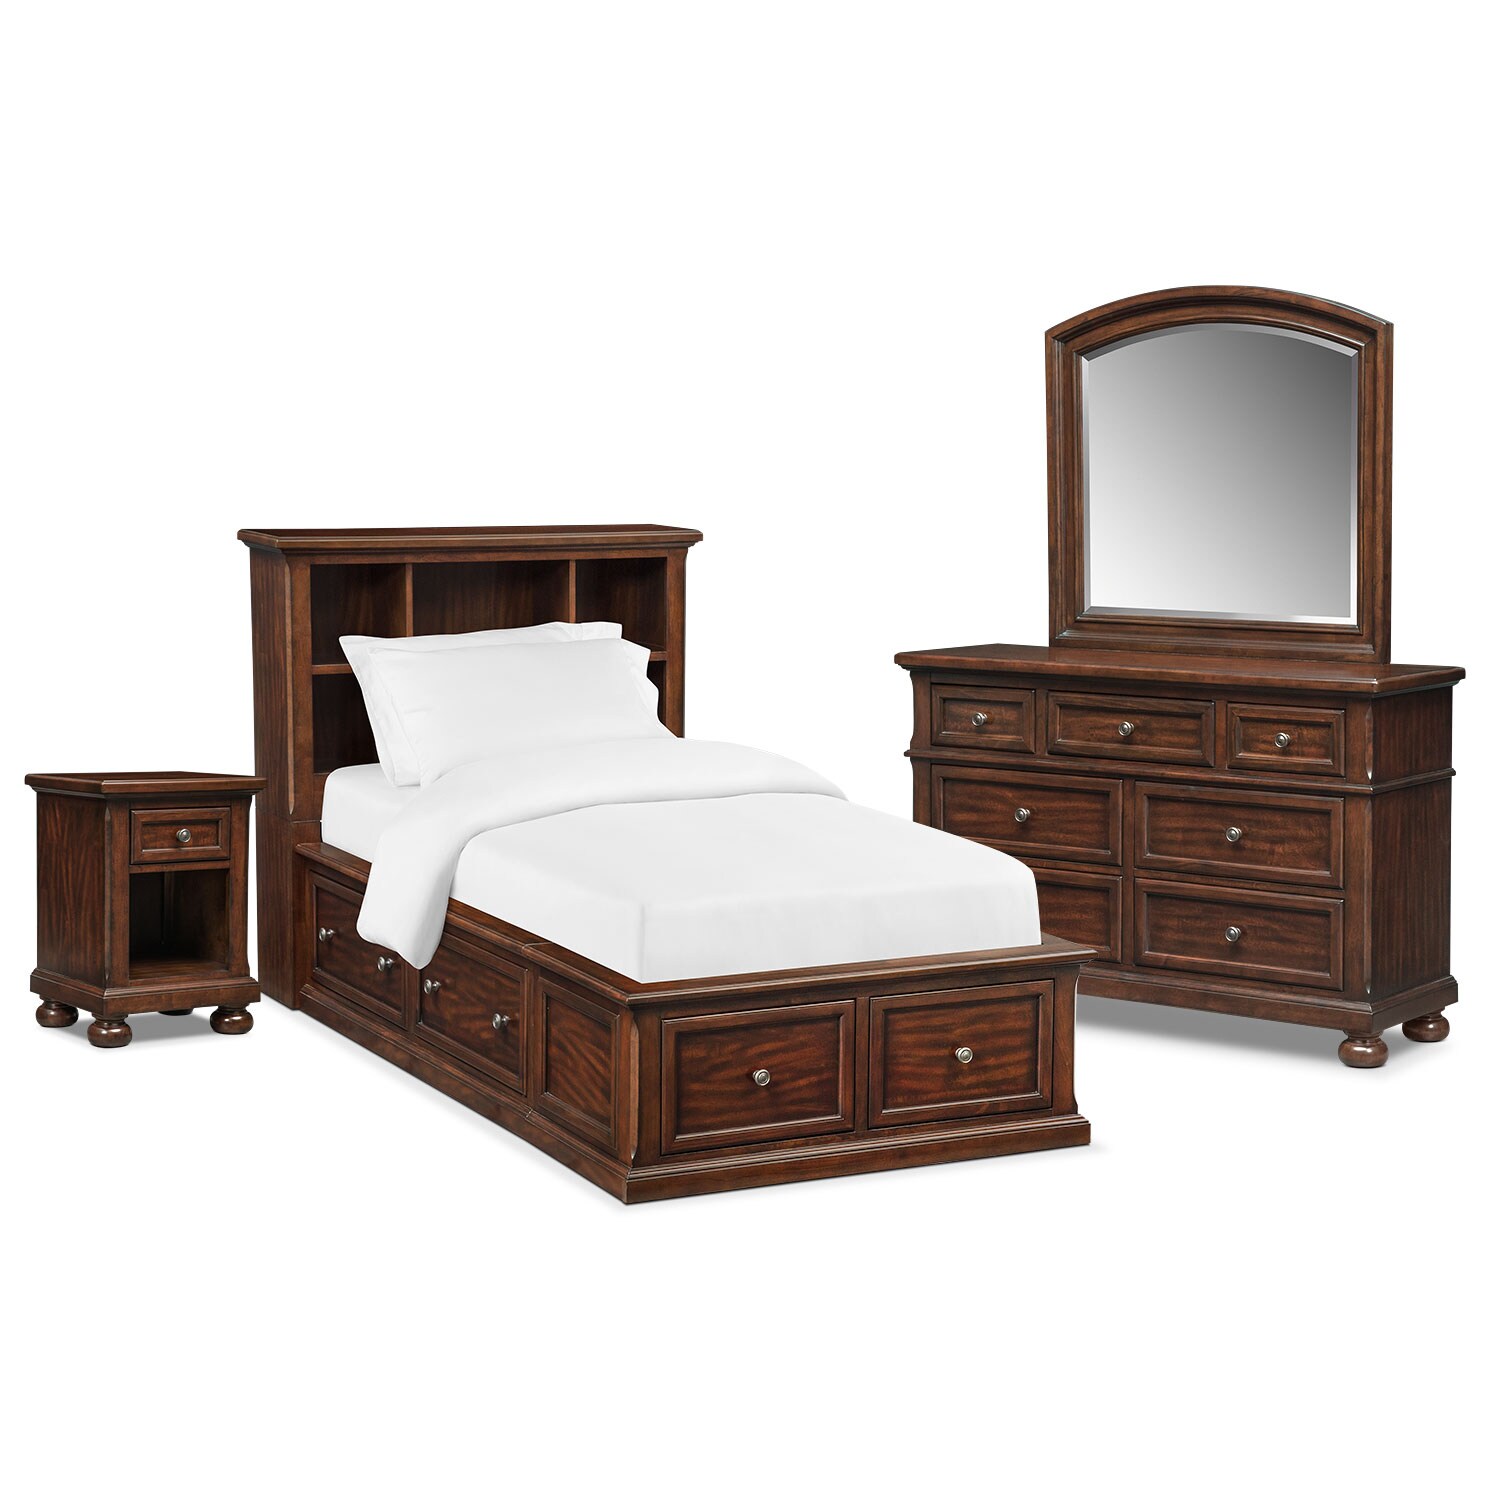 Hanover Youth 6 Piece Bookcase Storage Bedroom Set With Nightstand Dresser And Mirror